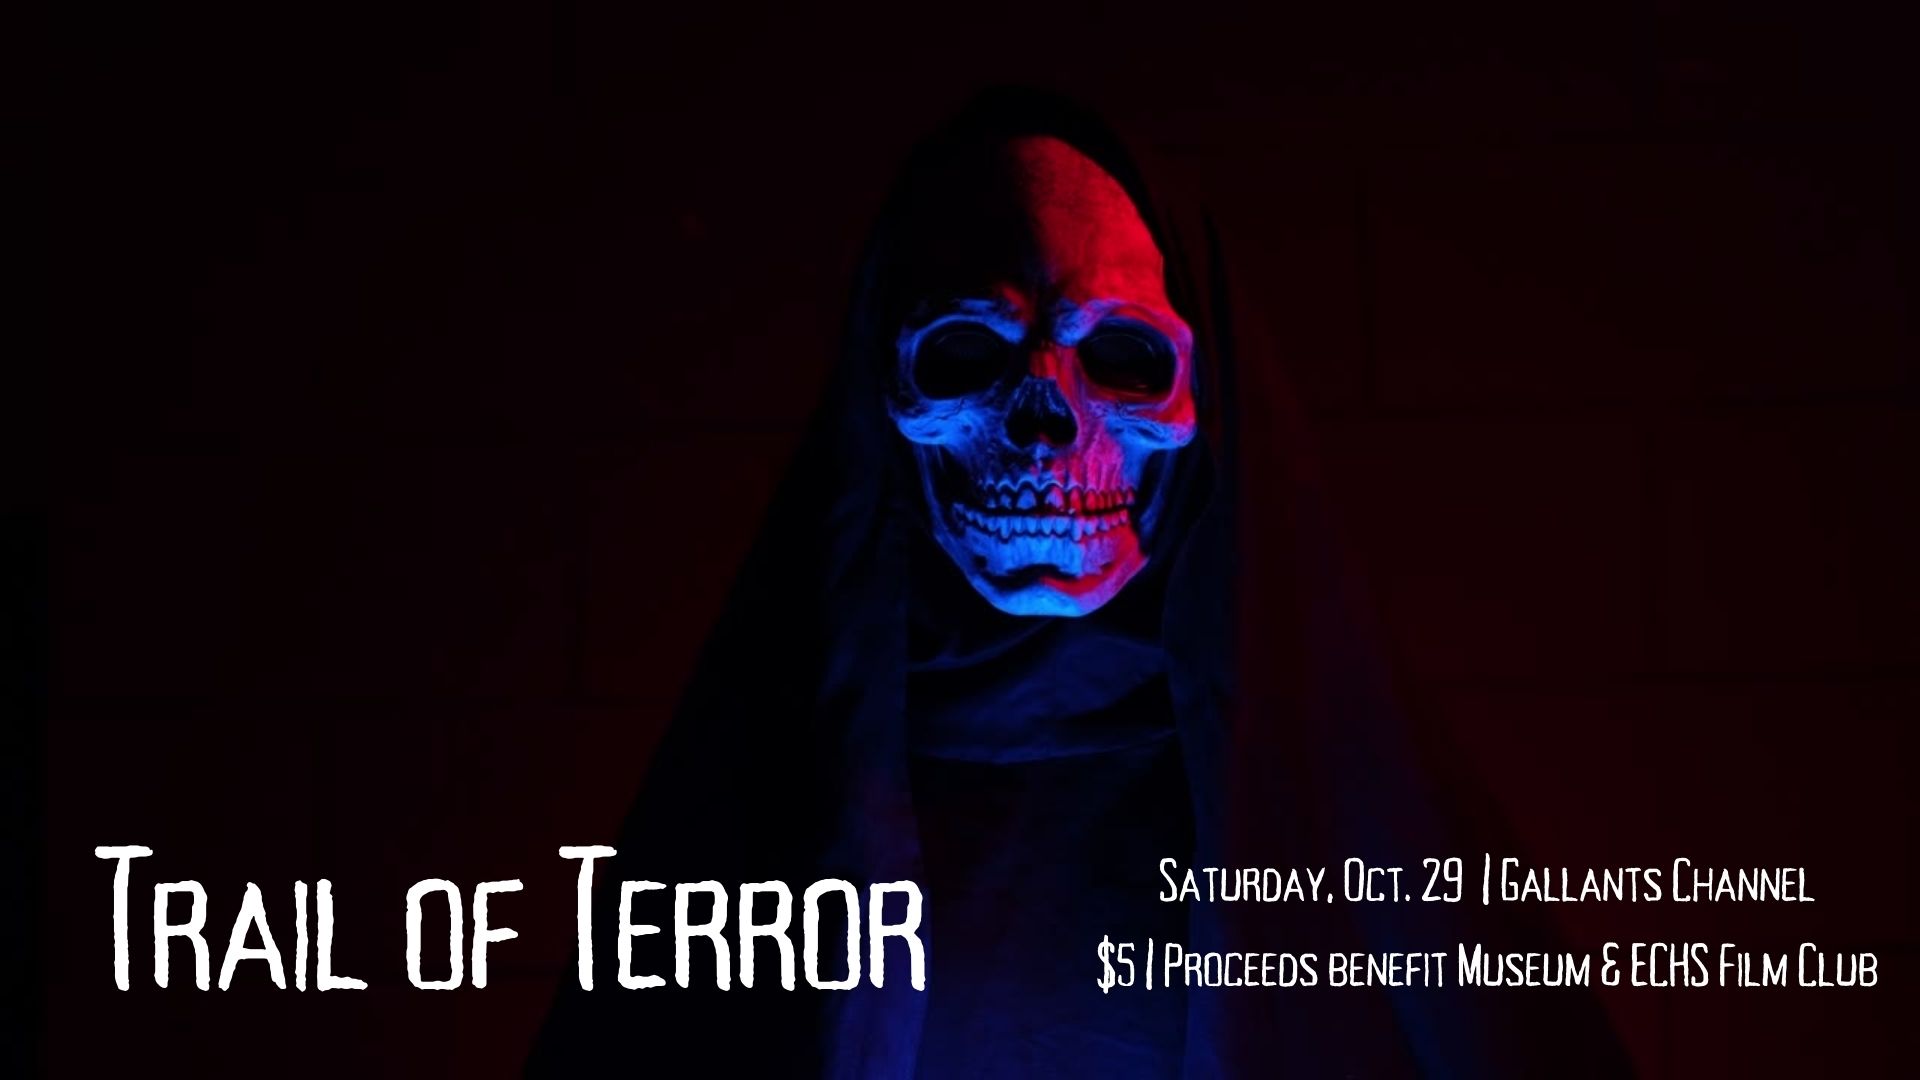 skull on black background with text reading Trail of Terror Saturday October 29 Gallants Channel $5 proceeds benefit museum and ECHS film club proceeds